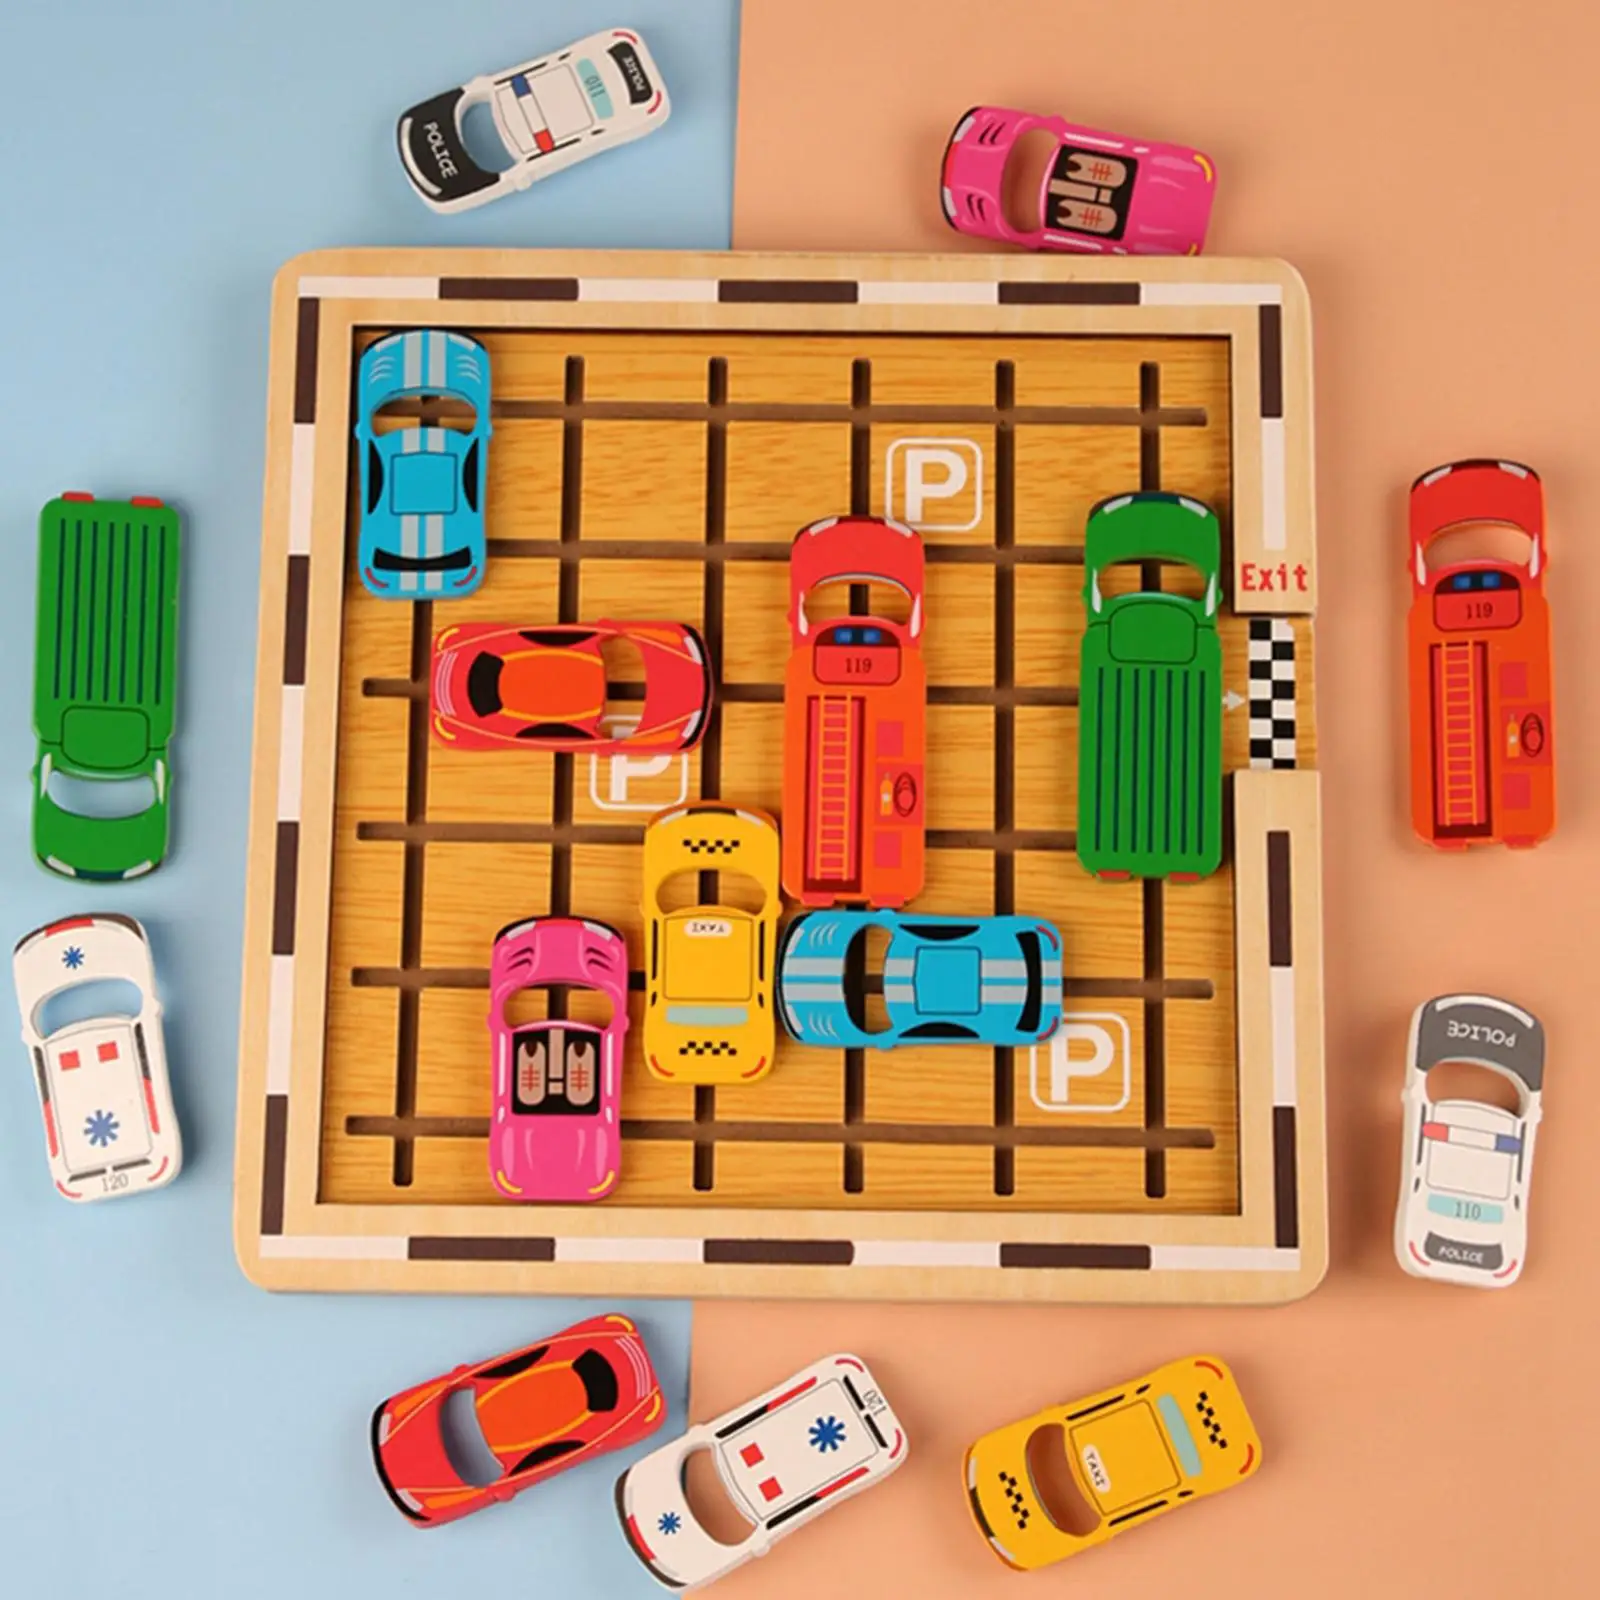 Wooden Early Education Car Sensory Toy Logical Thinking Training Educational Toys Fine Motor Skills for Toddlers Boys Kids Gifts